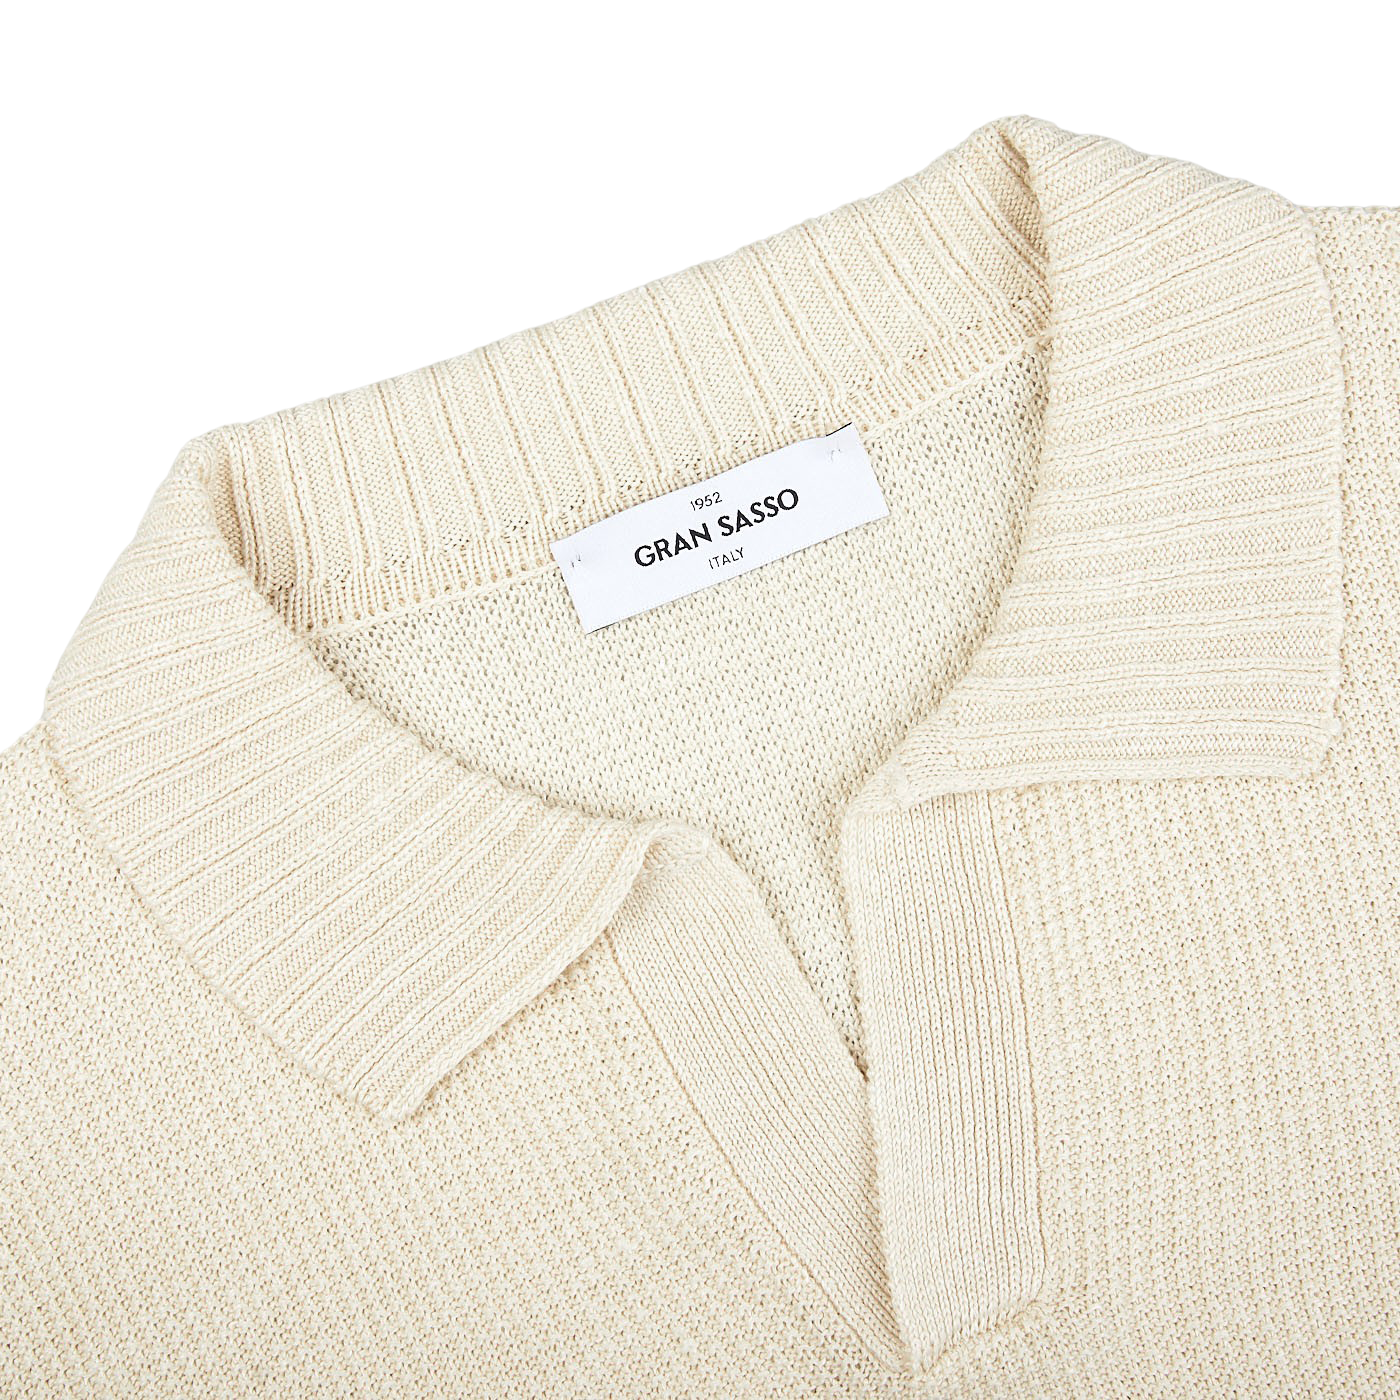 A Cream Beige Cotton Linen Polo Shirt by Gran Sasso in a slim fit with a white label.